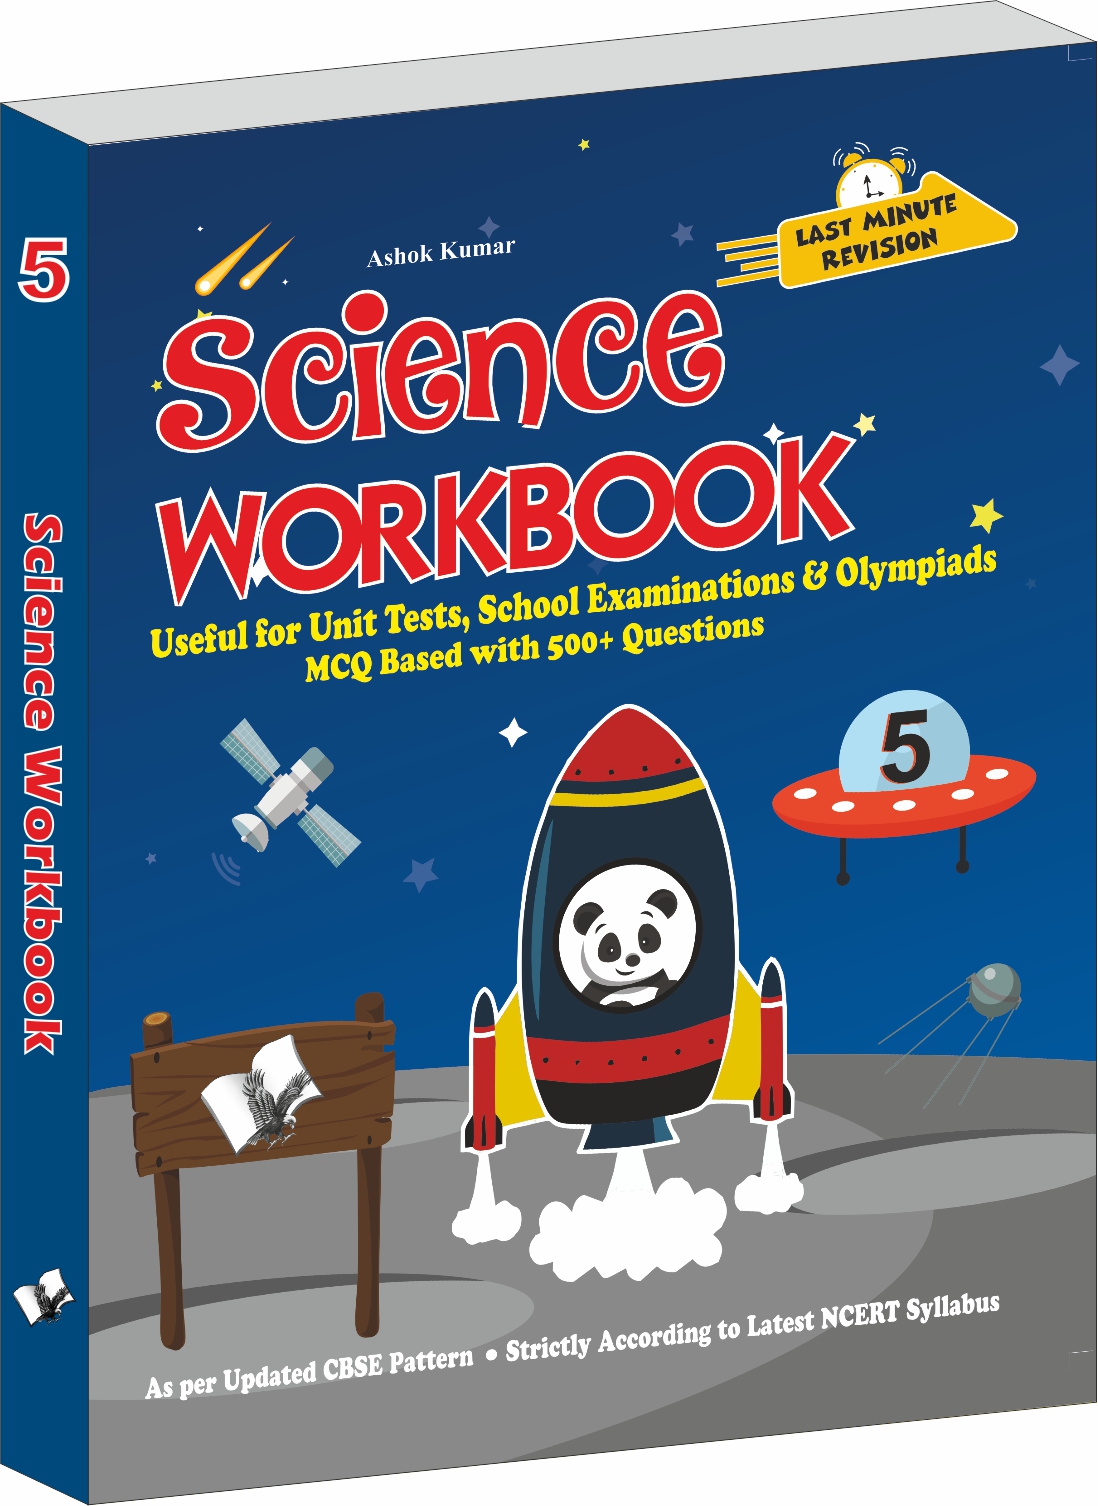 Science Workbook Class 5-Useful for Unit Tests, School Examinations & Olympiads